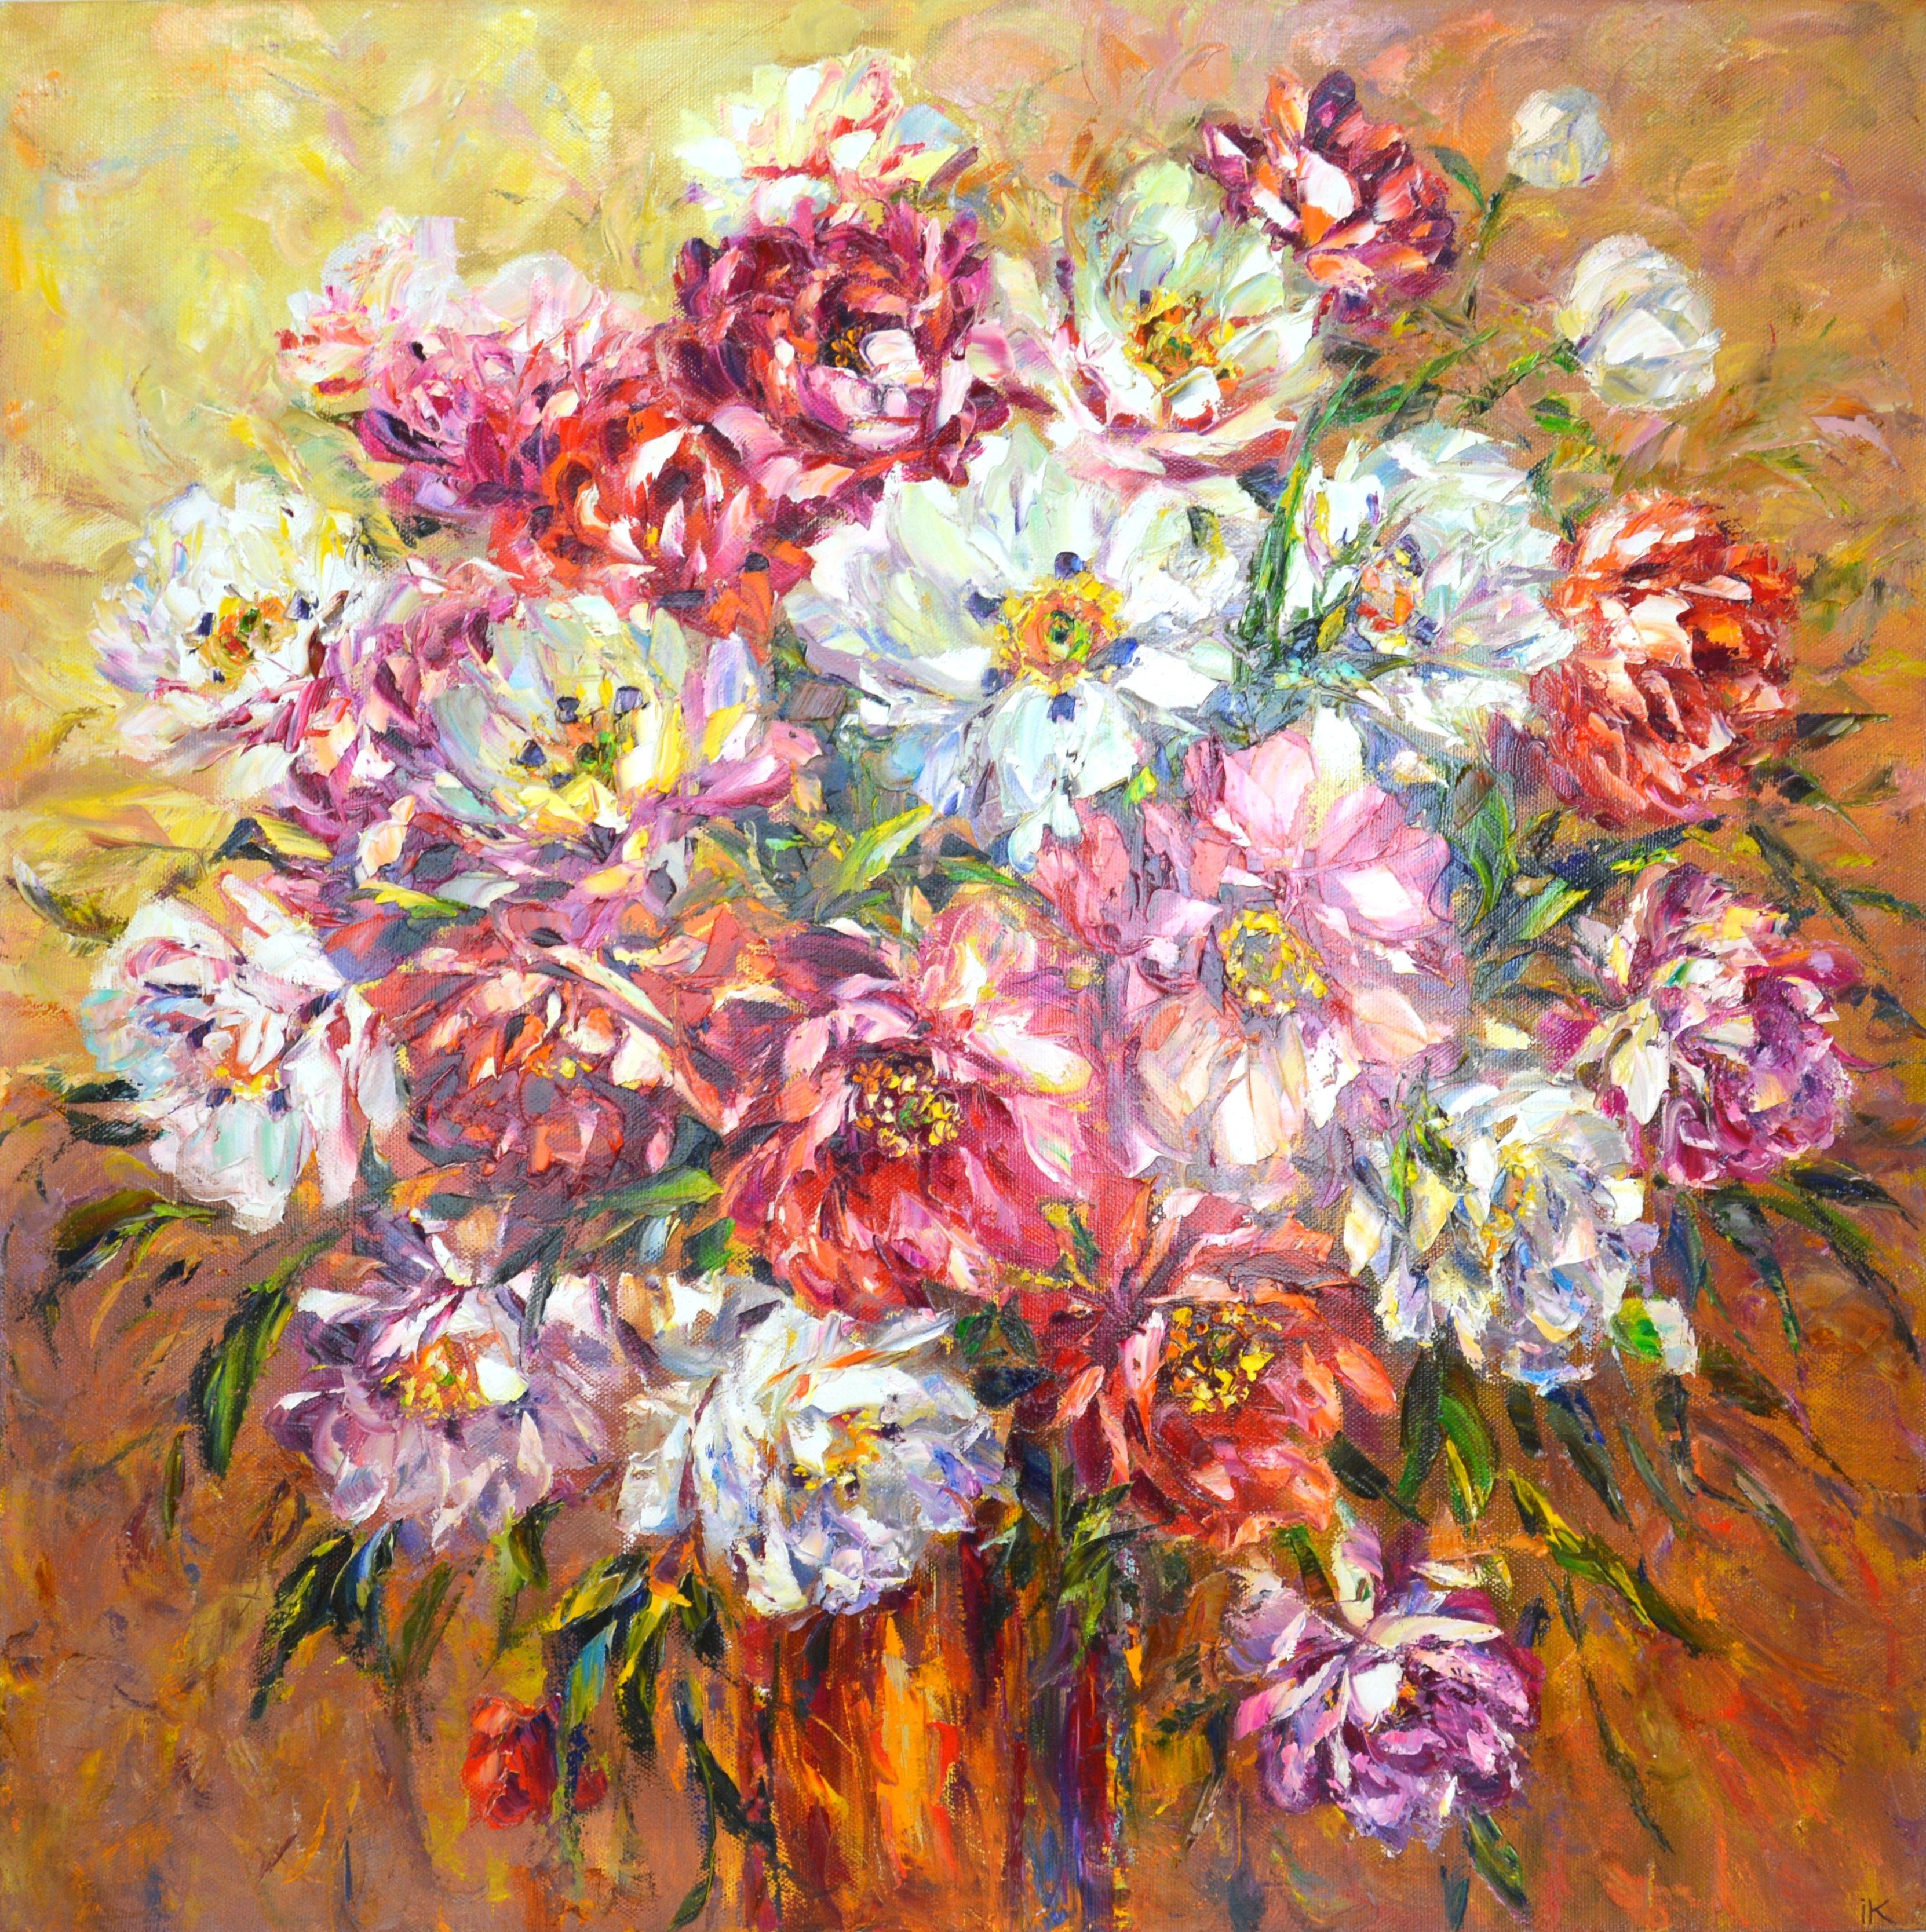 Bouquet. Still life: Red, pink, white peonies on an abstract ginger background, created with brushes and a spatula. The picture is filled with positive, solar energy. Part of a permanent series of floral arrangements. Realism. Impressionism.